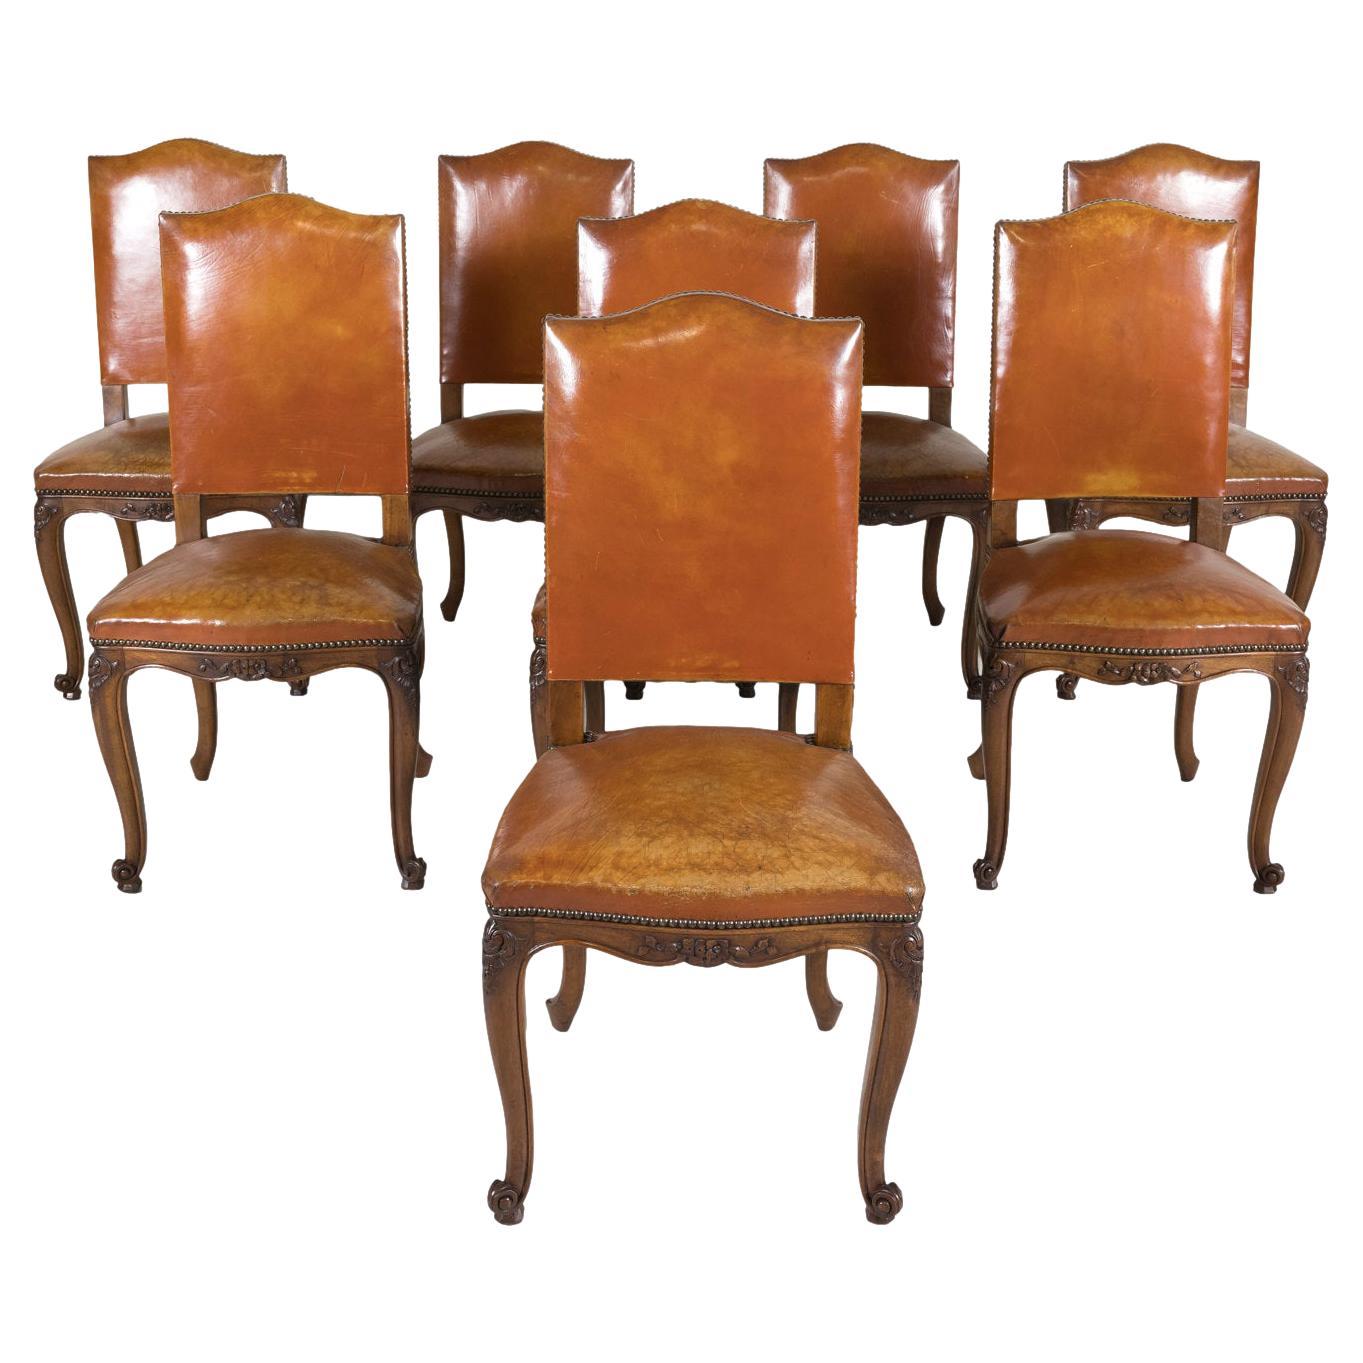 Set of 8 Early 20th Century French Louis XV Style Walnut and Leather Side Chairs